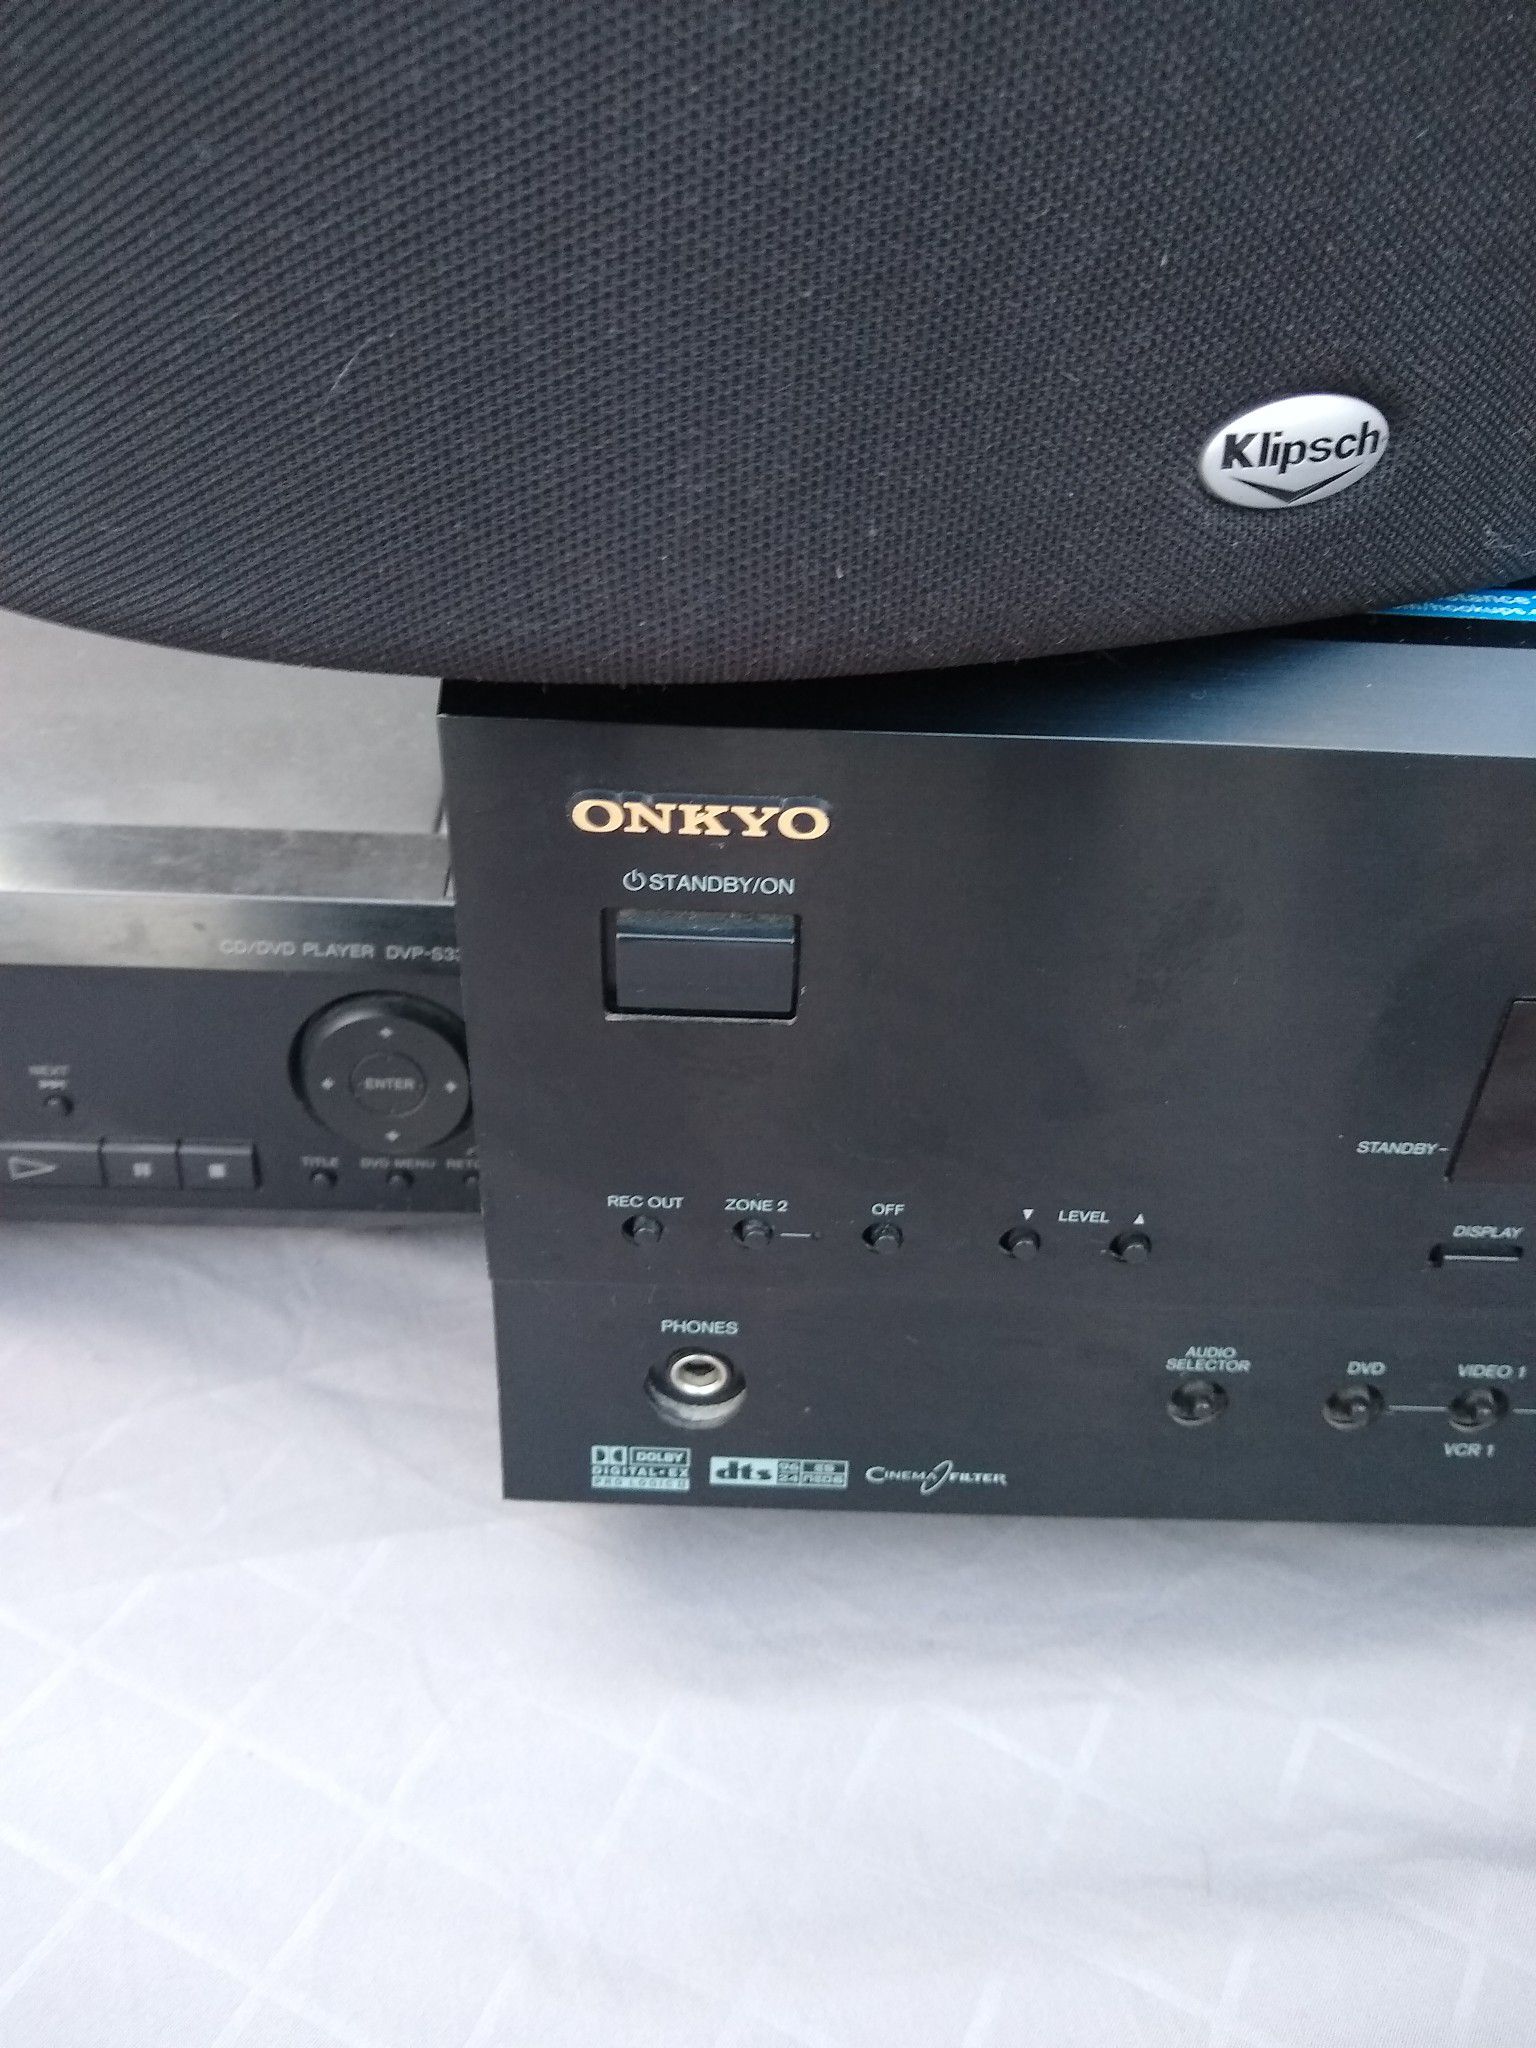 Onkyo dial zone receiver and Klipsch speakers.